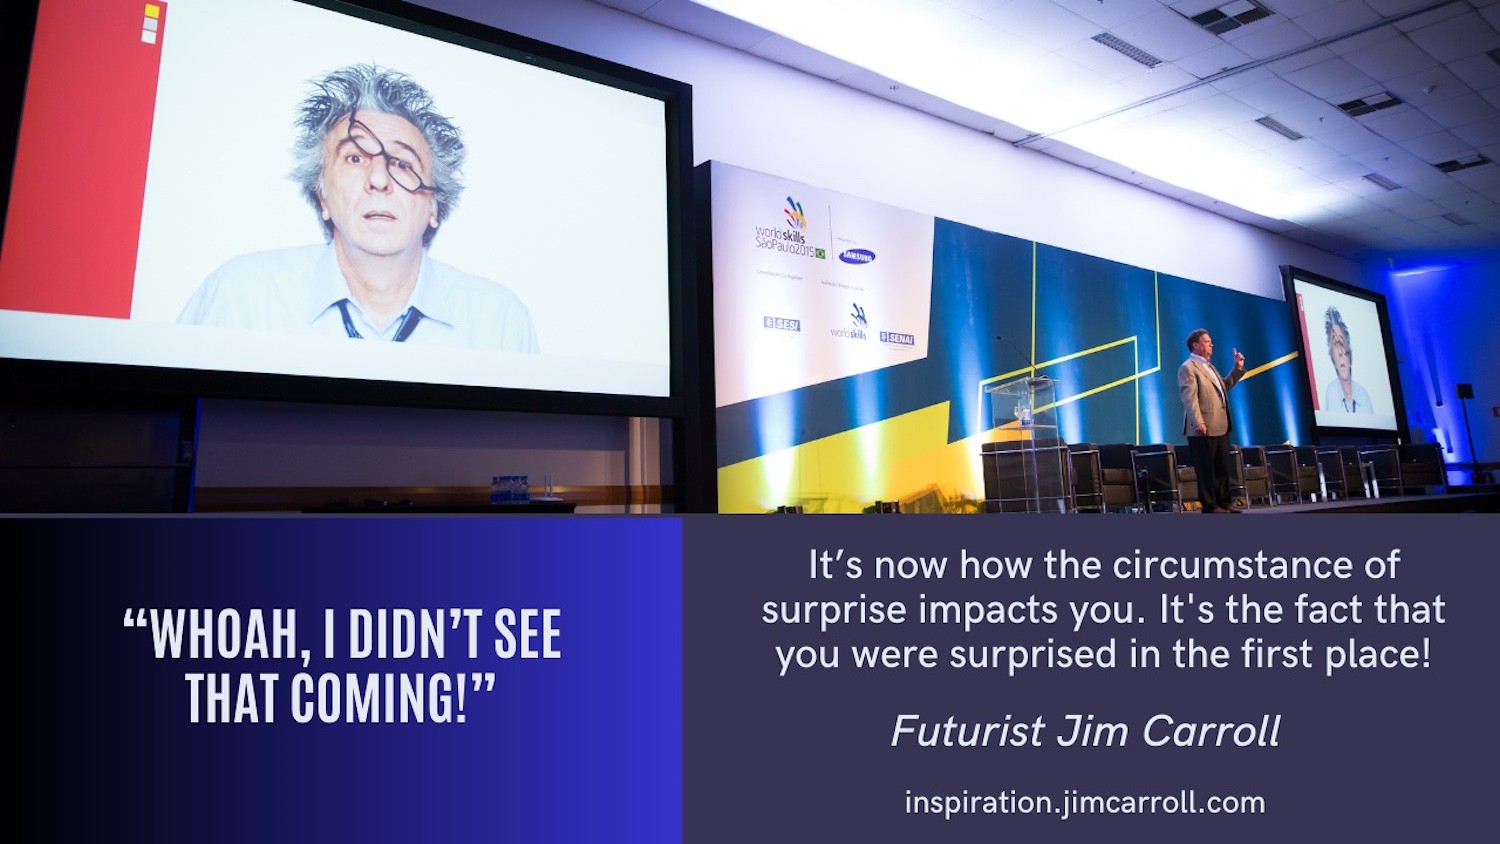 "It's now how the circumstance of surprise impacts you. It's the fact that you were surprised in the first place!" - Futurist Jim Carroll